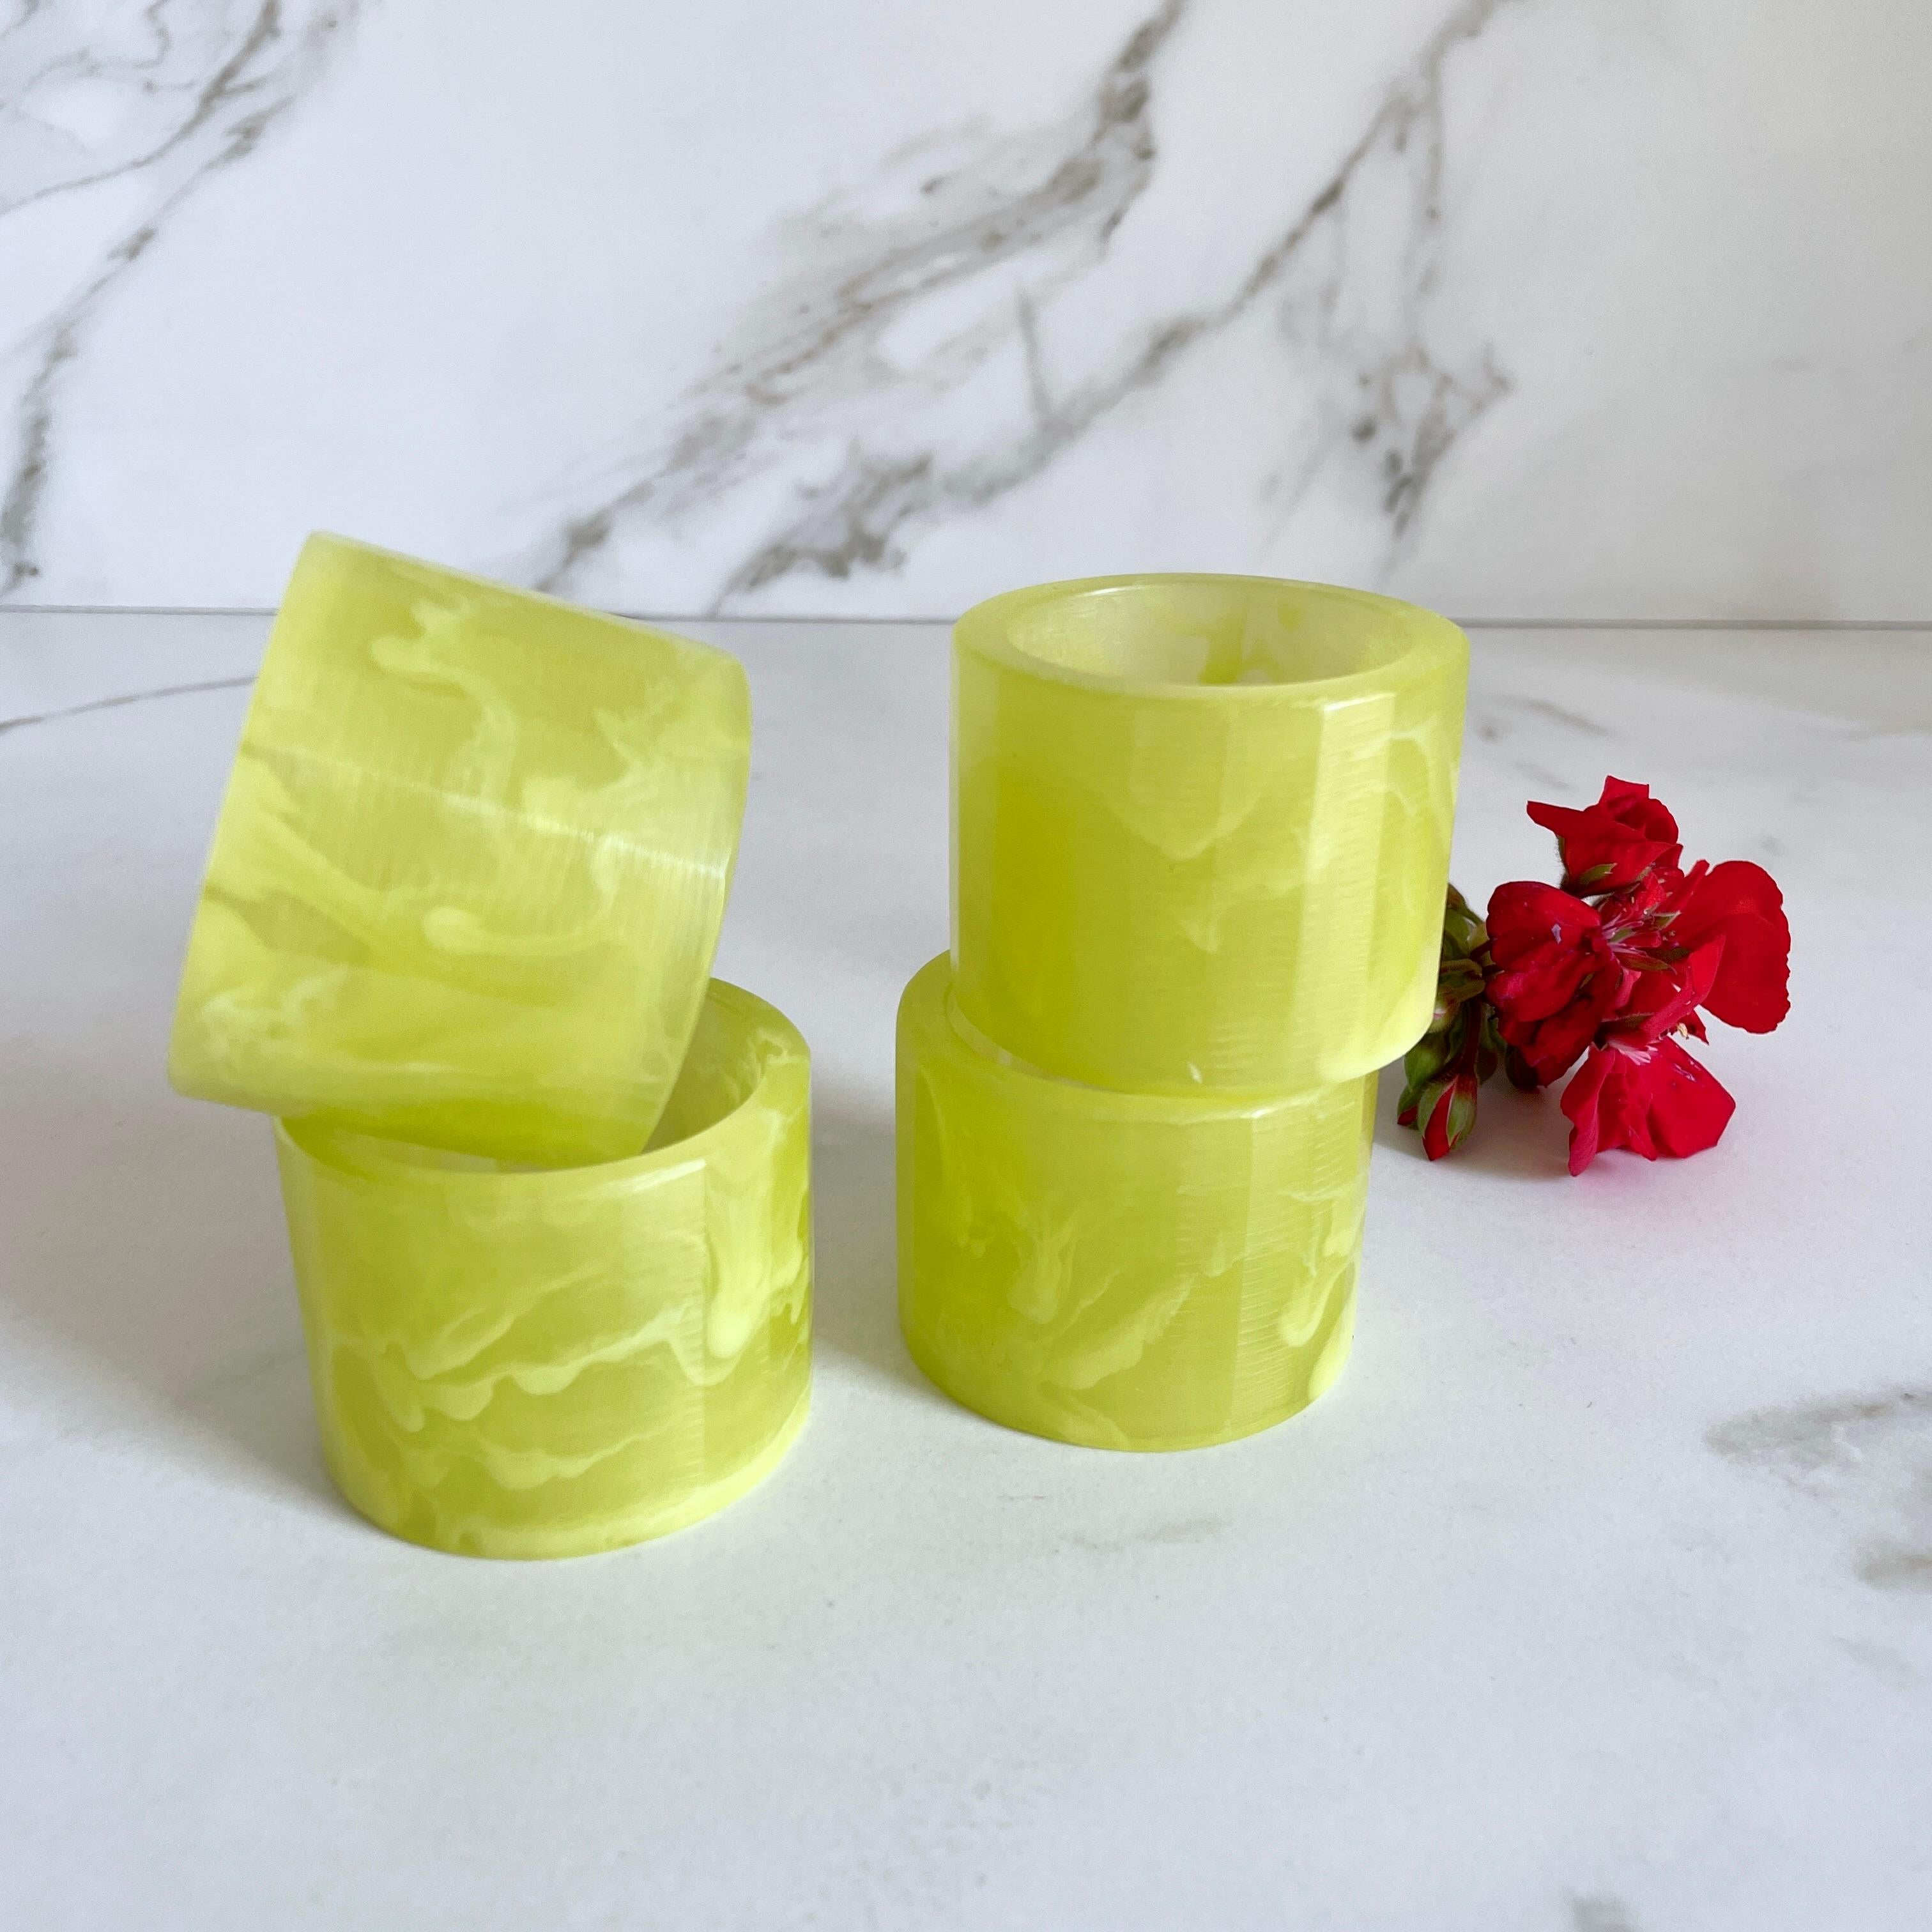 Set of 4 Napkin Rings in Lime Green Swirl Resin by Paola Valle In New Condition For Sale In Ciudad De México, MX